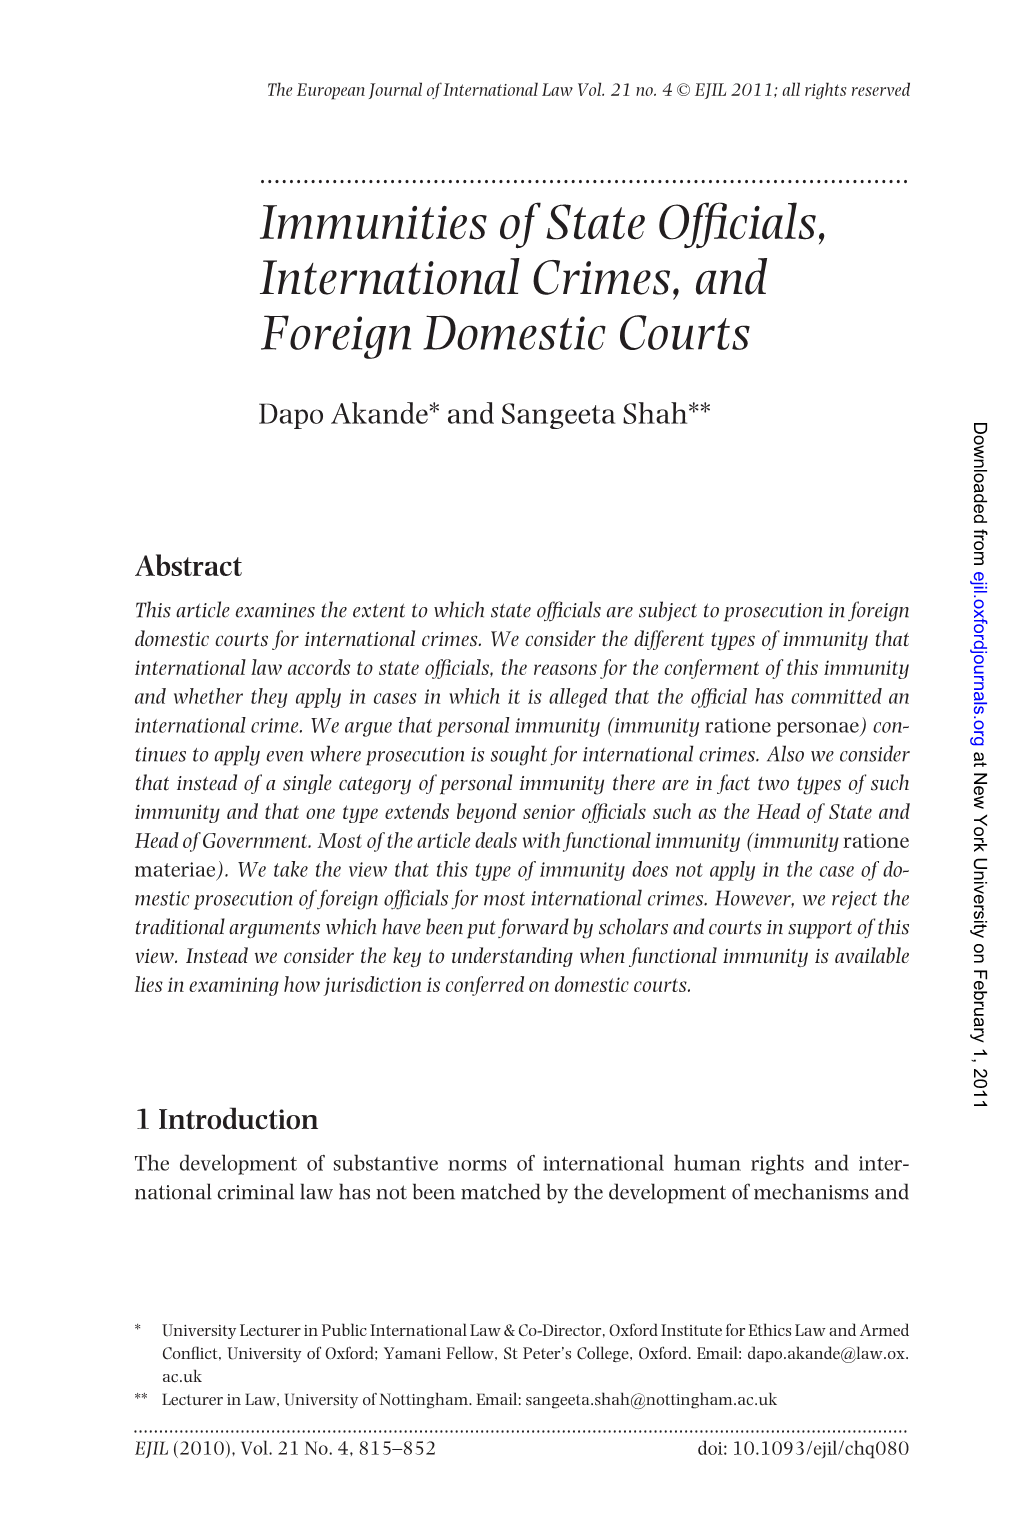 Immunities, International Crimes and Foreign Domestic Courts